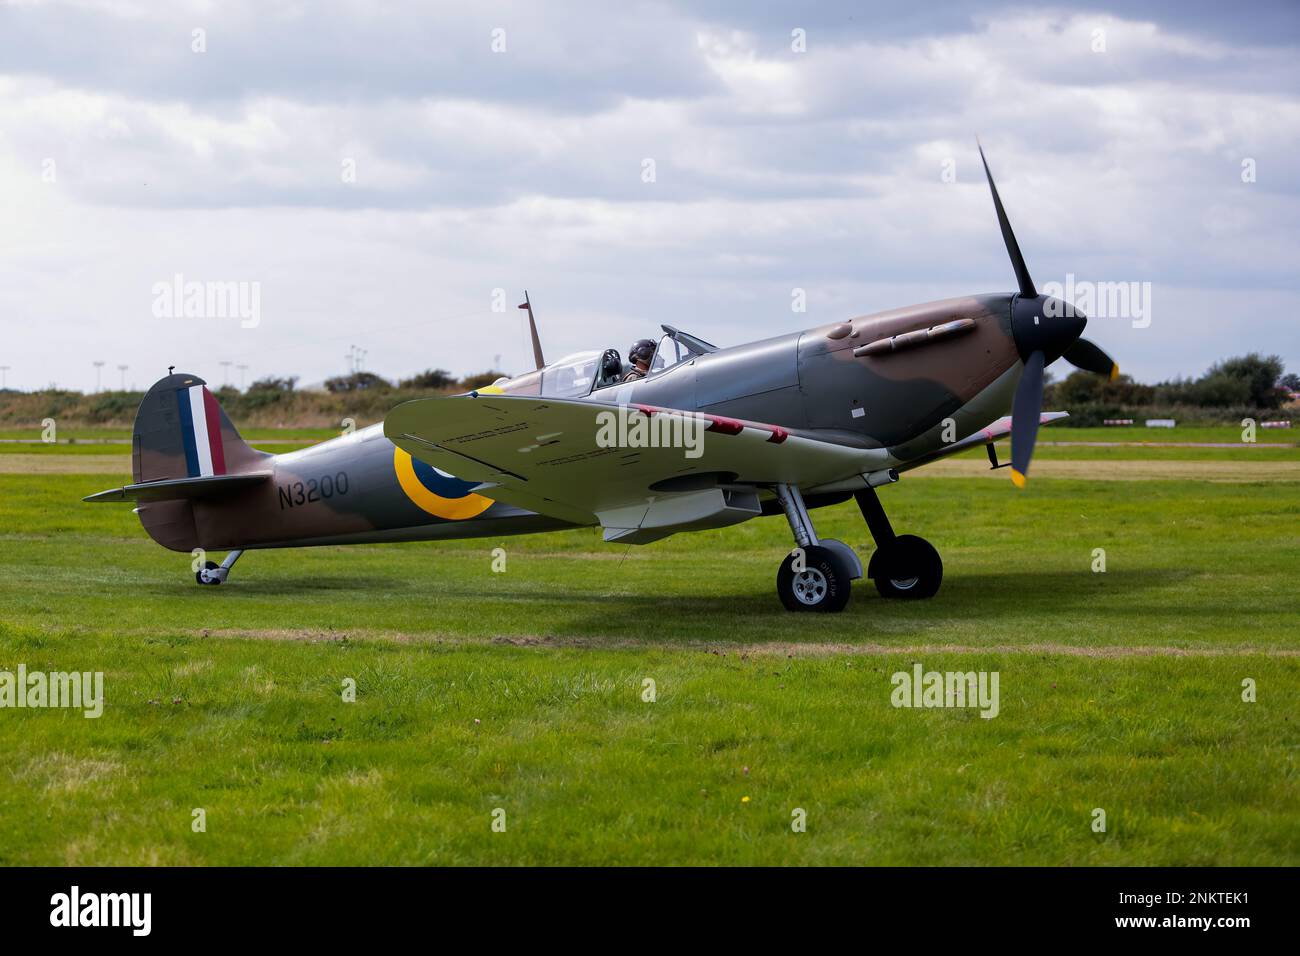 This is the Supermarine Spitfire Ia P9374 which served wtith the RAF during the Battle of Britain. The display was at Shoreham Airshow, Shoreham Airport, East Sussex, UK. 30th August 2014 Stock Photo